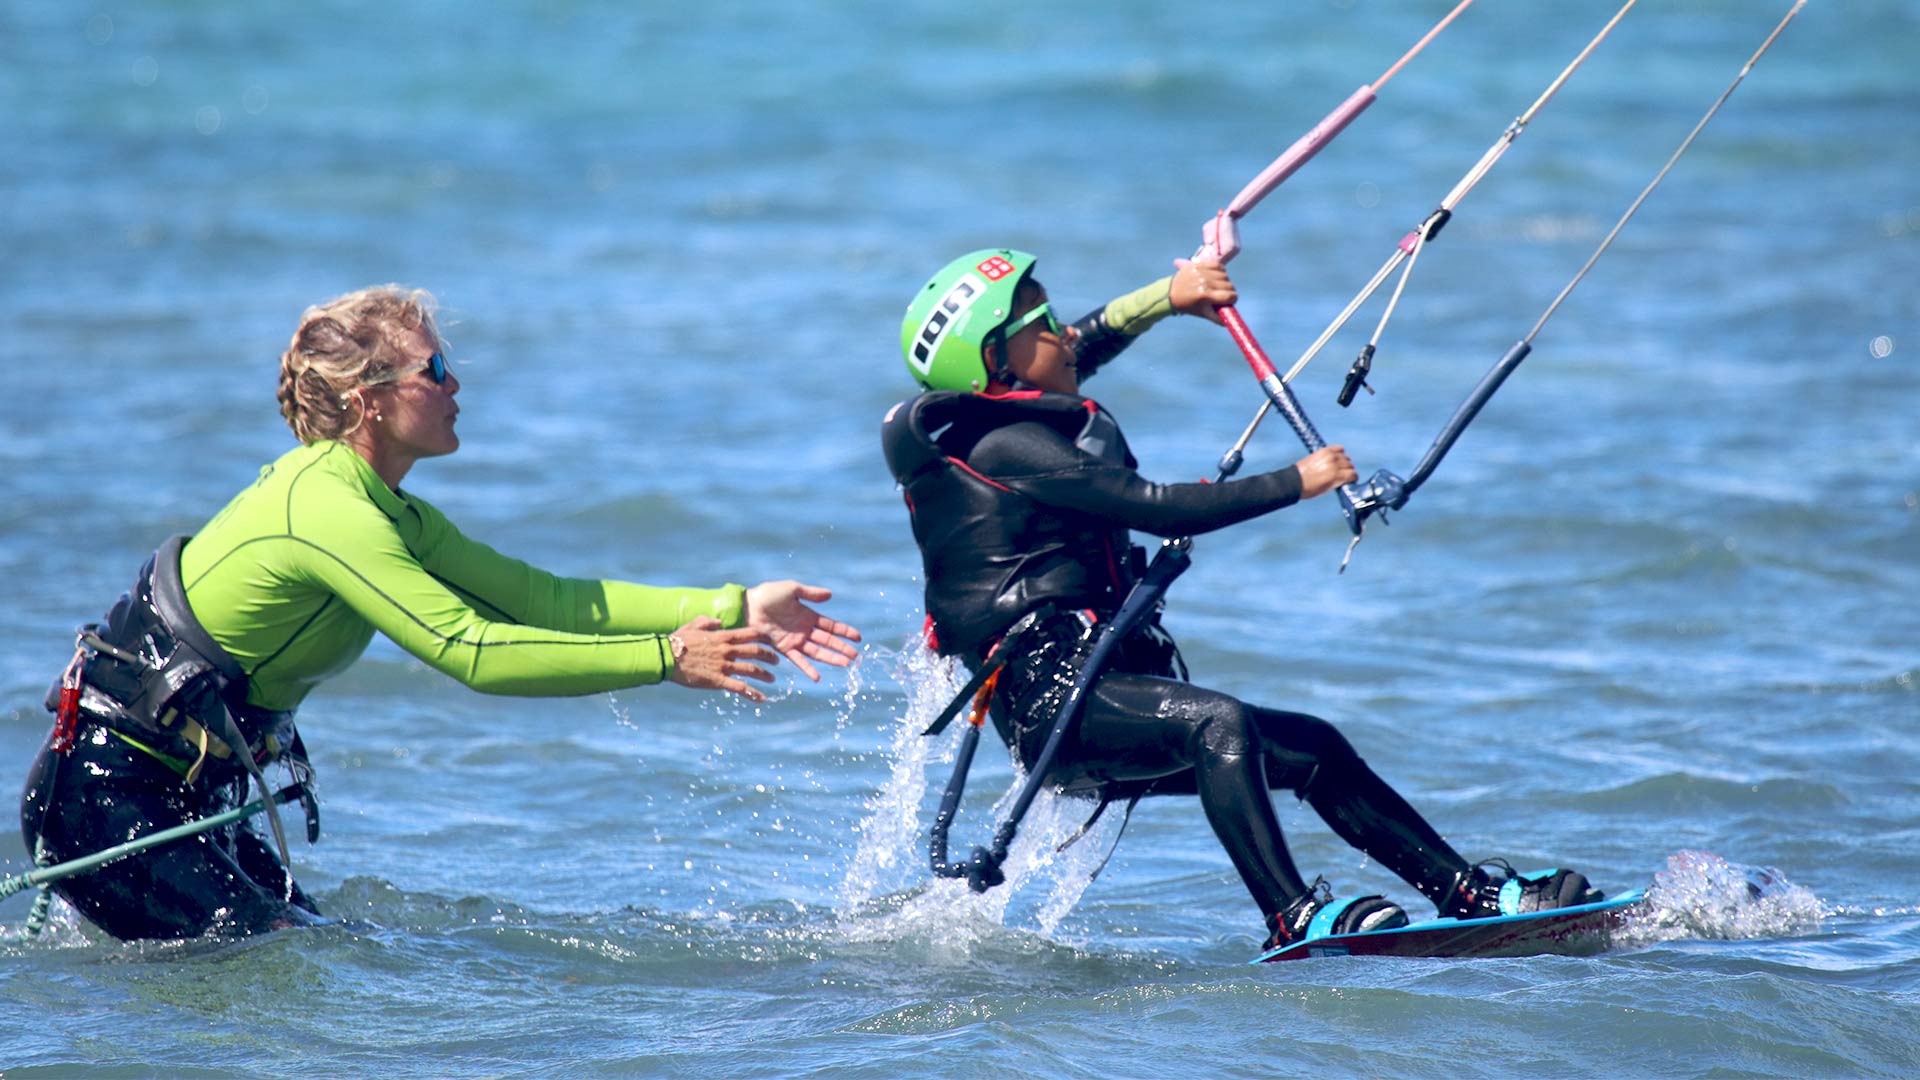 A kitesurfing instructor from the Ion Club team teaches a girl how to waterstart.